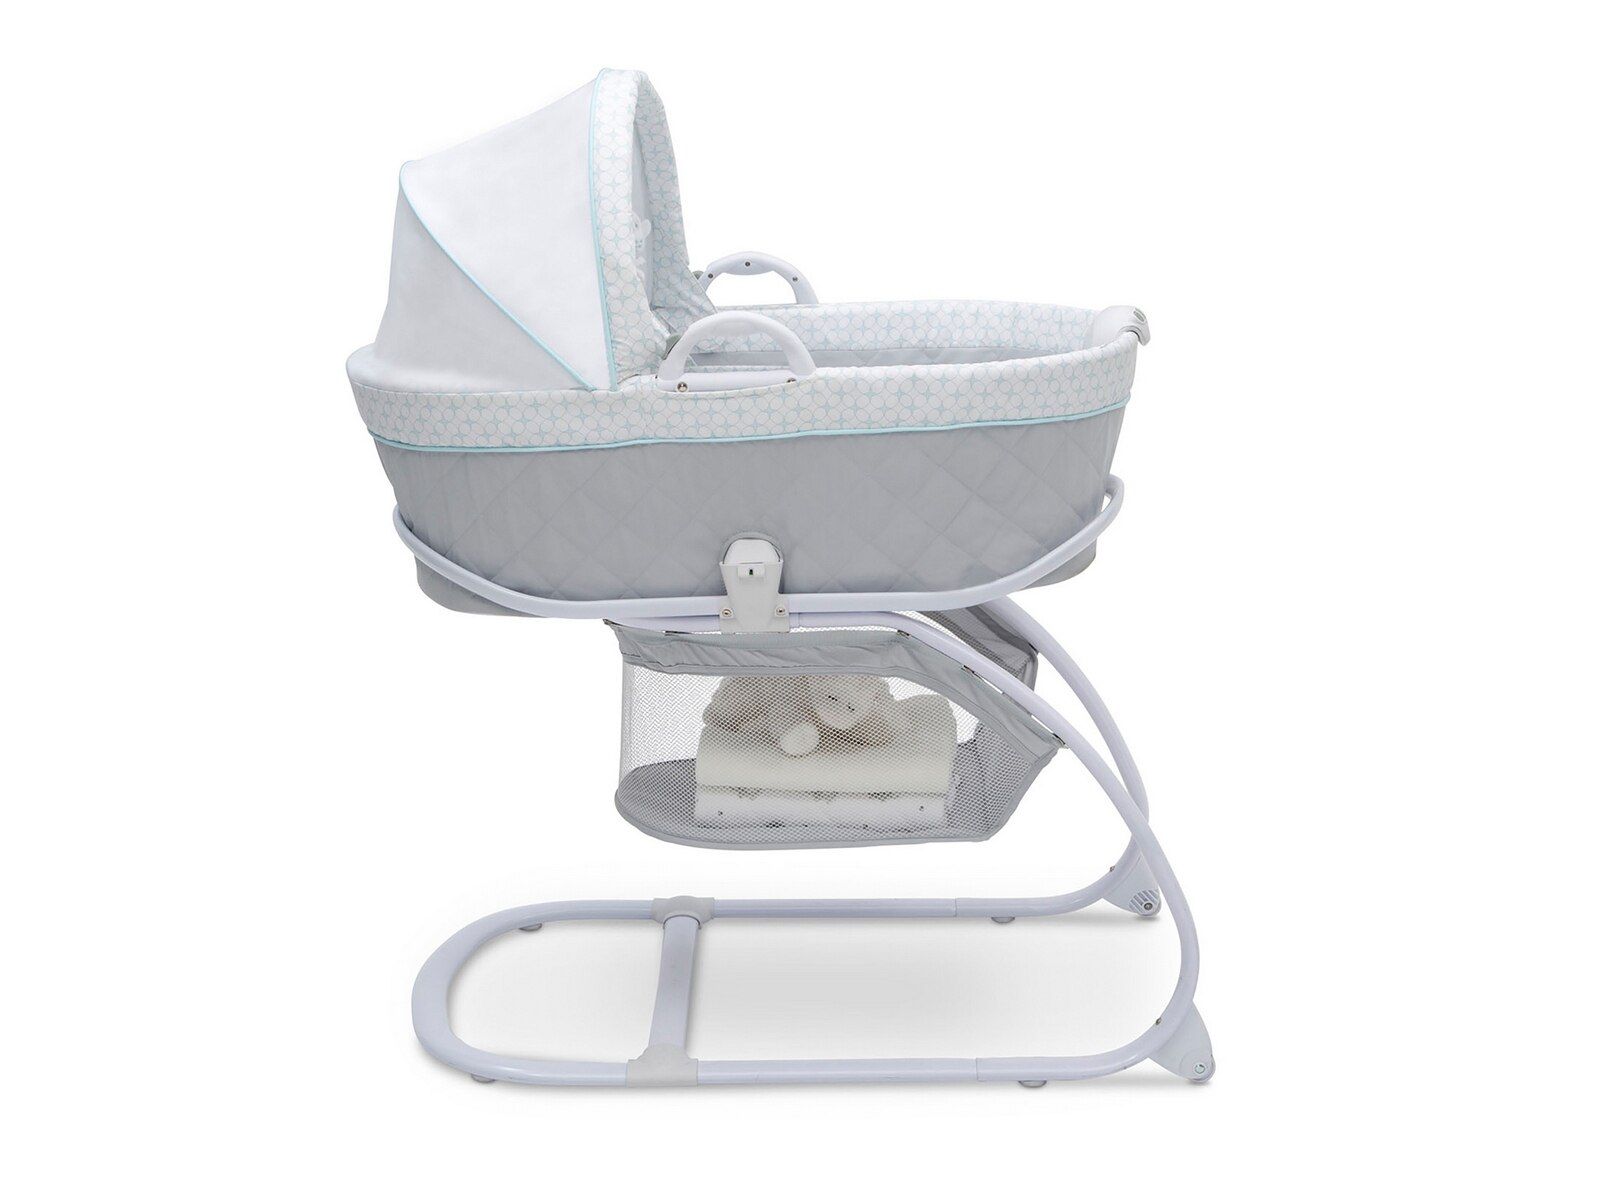 Deluxe Moses Bassinet